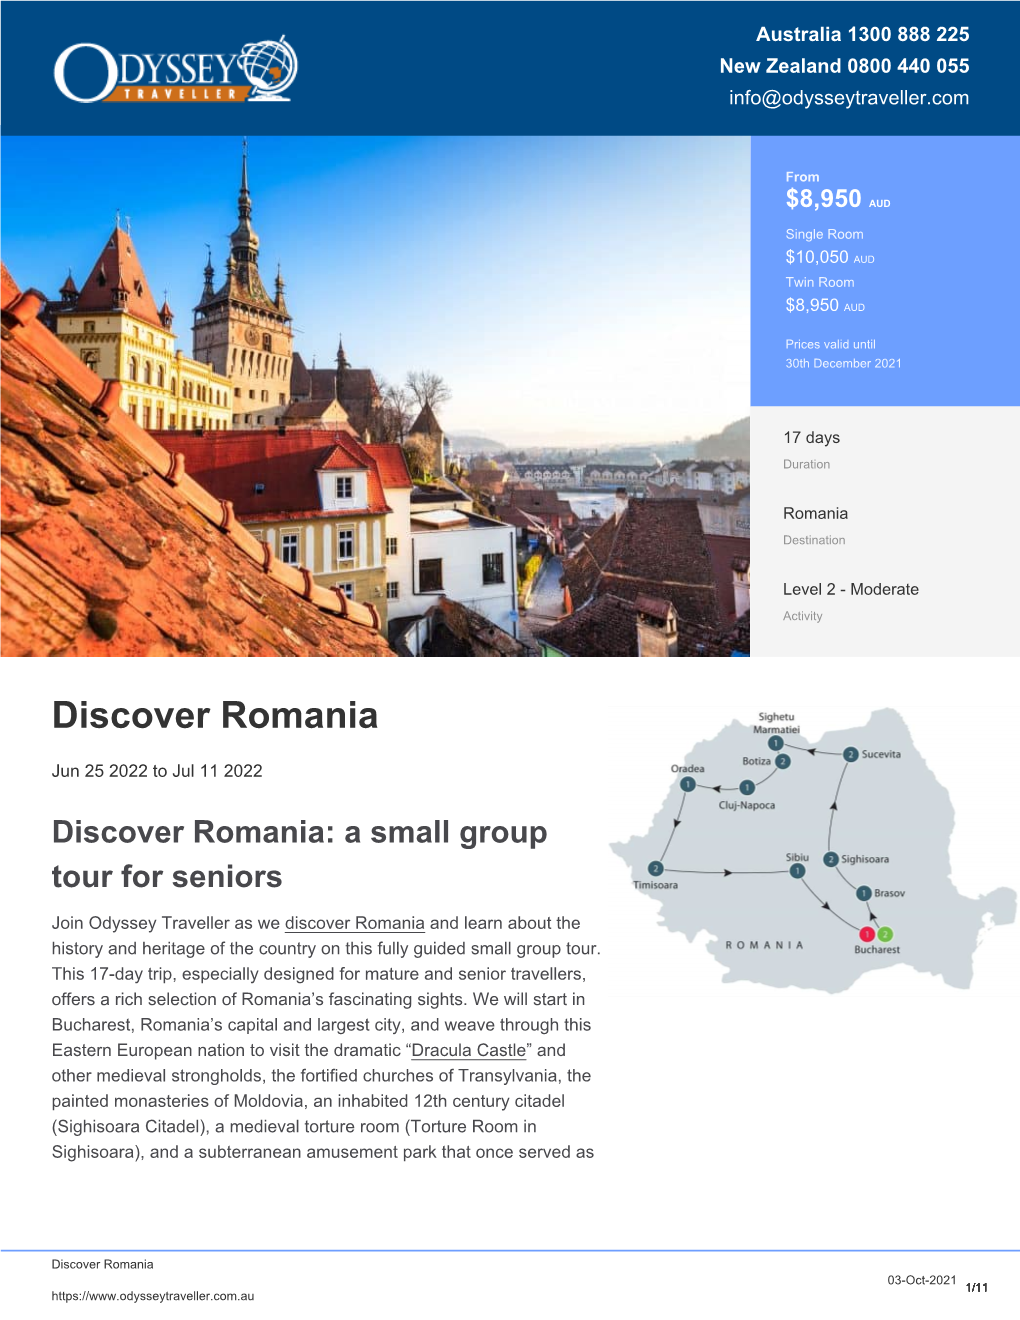 Discover Romania | Small Group Tour for Seniors | Odyssey Traveller